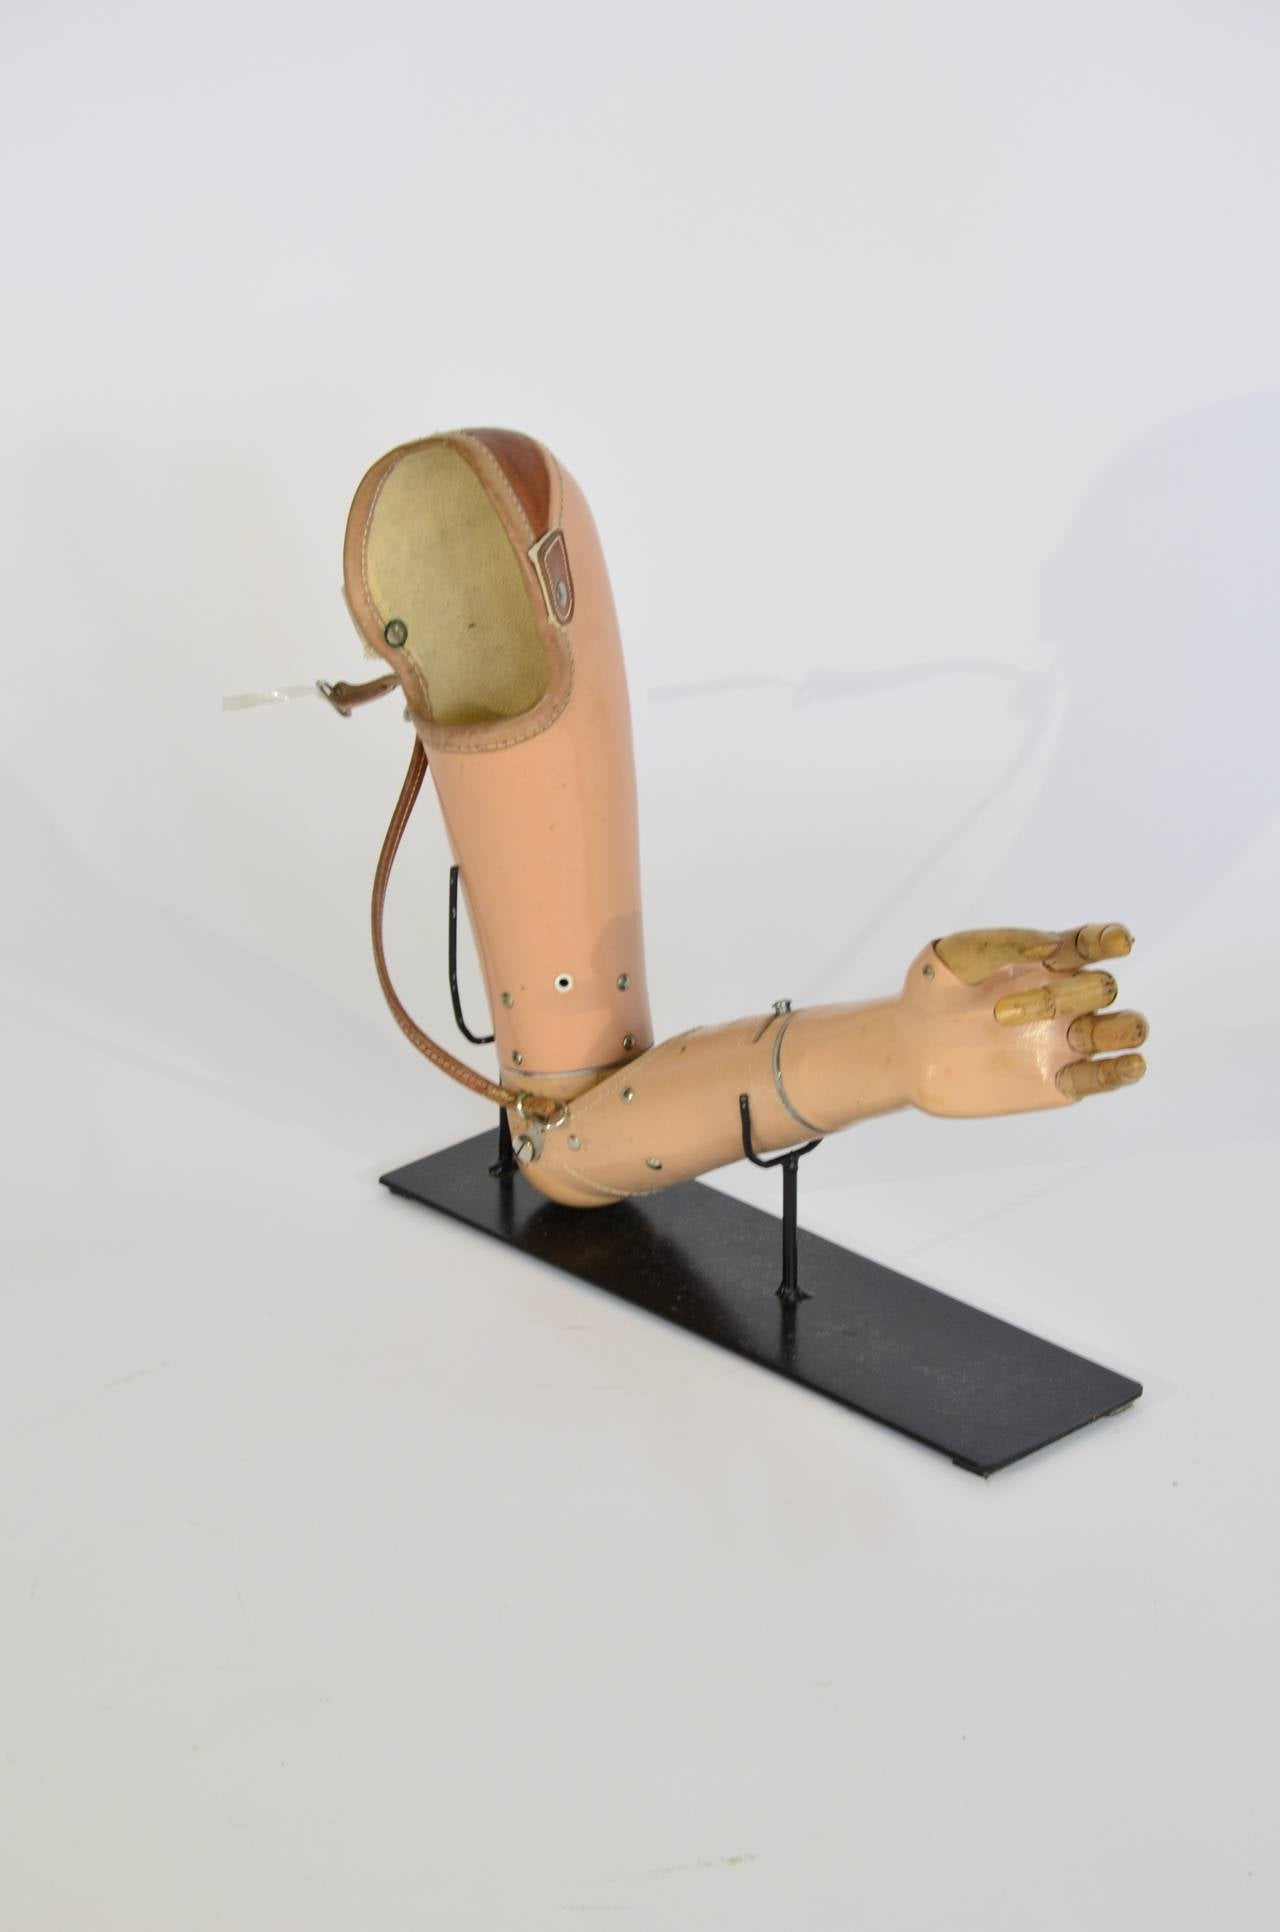 Nice early prosthetic arm with articulated fingers. This 1930's device was top of the line for its time. Excellent conversation piece. Custom display stand.

Please feel free to contact Polished Modern directly for best pricing and shipping